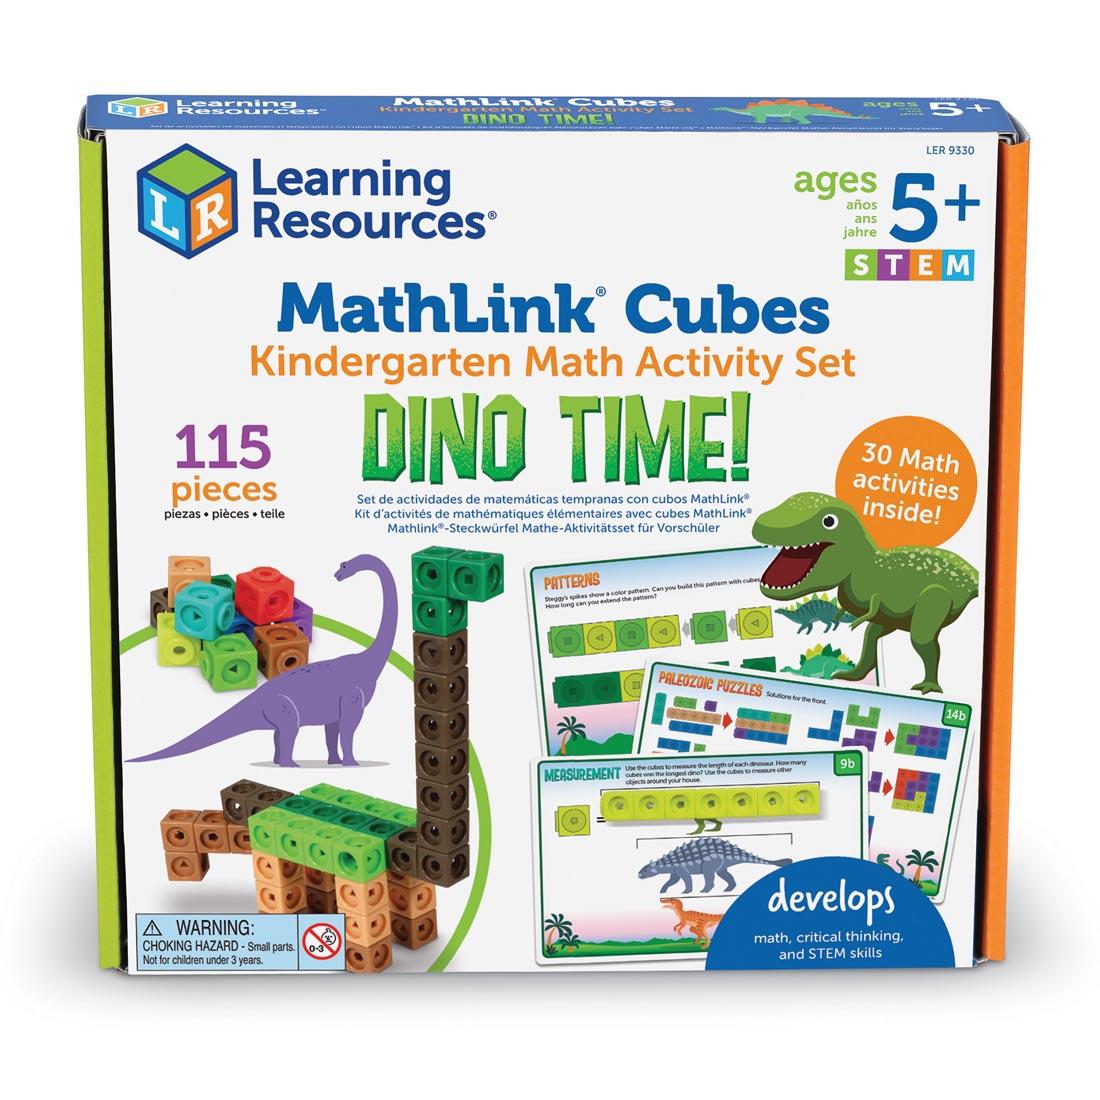 MathLink Cubes Kindergarten Math Activity Set: Dino Time! By Learning Resources